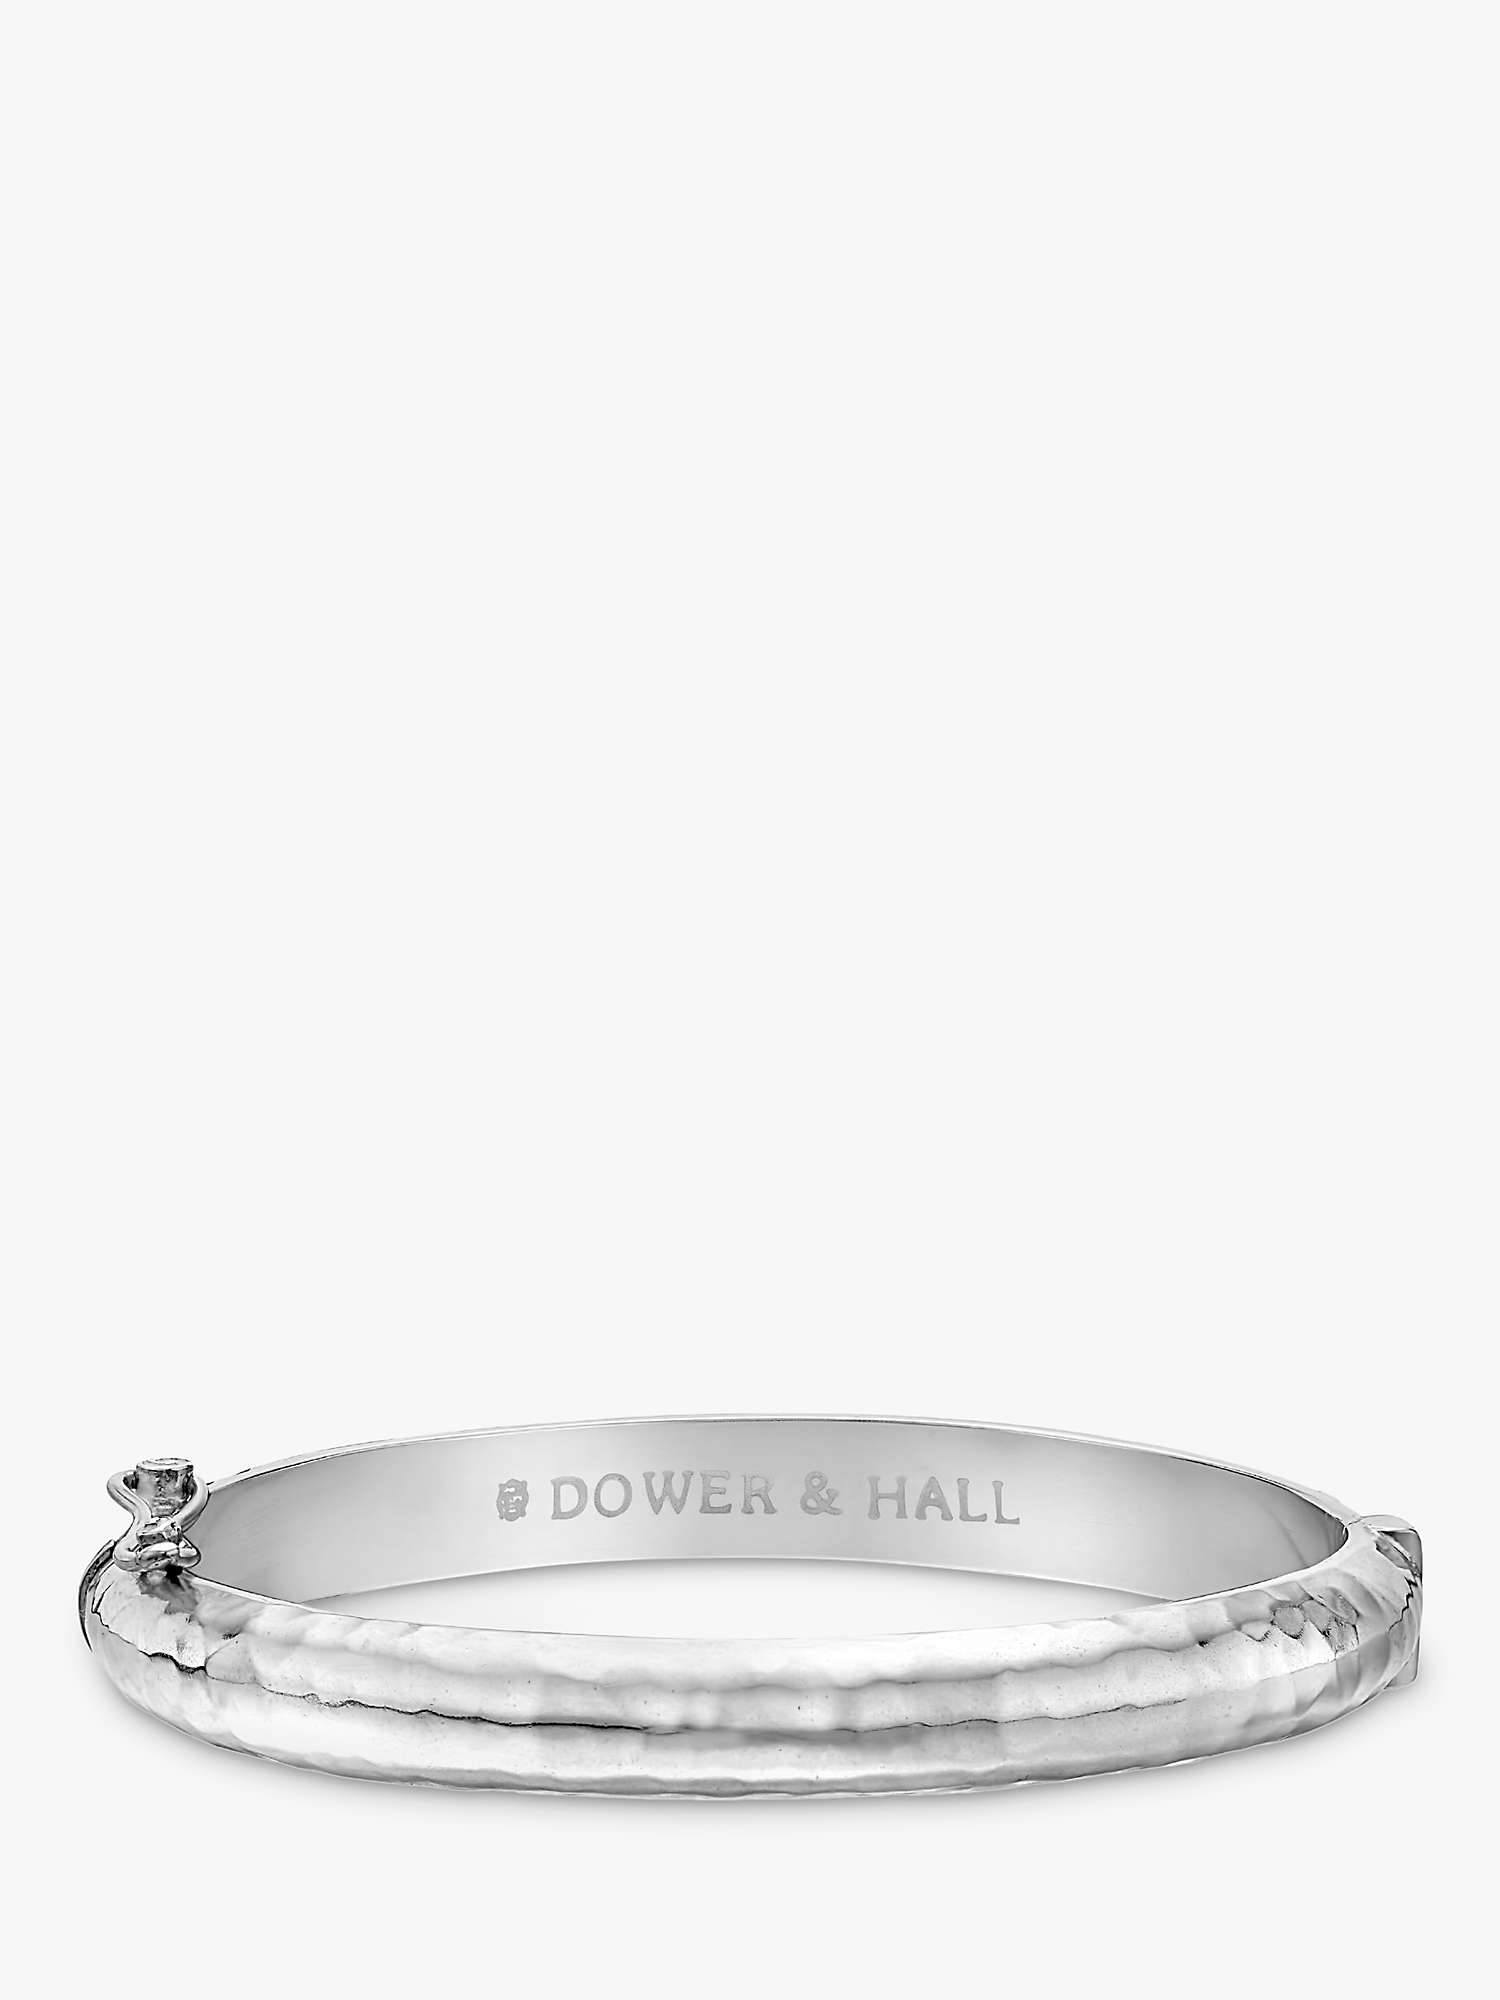 Buy Dower & Hall Sterling Silver Hollow Hinged Hammered Bangle, Silver Online at johnlewis.com